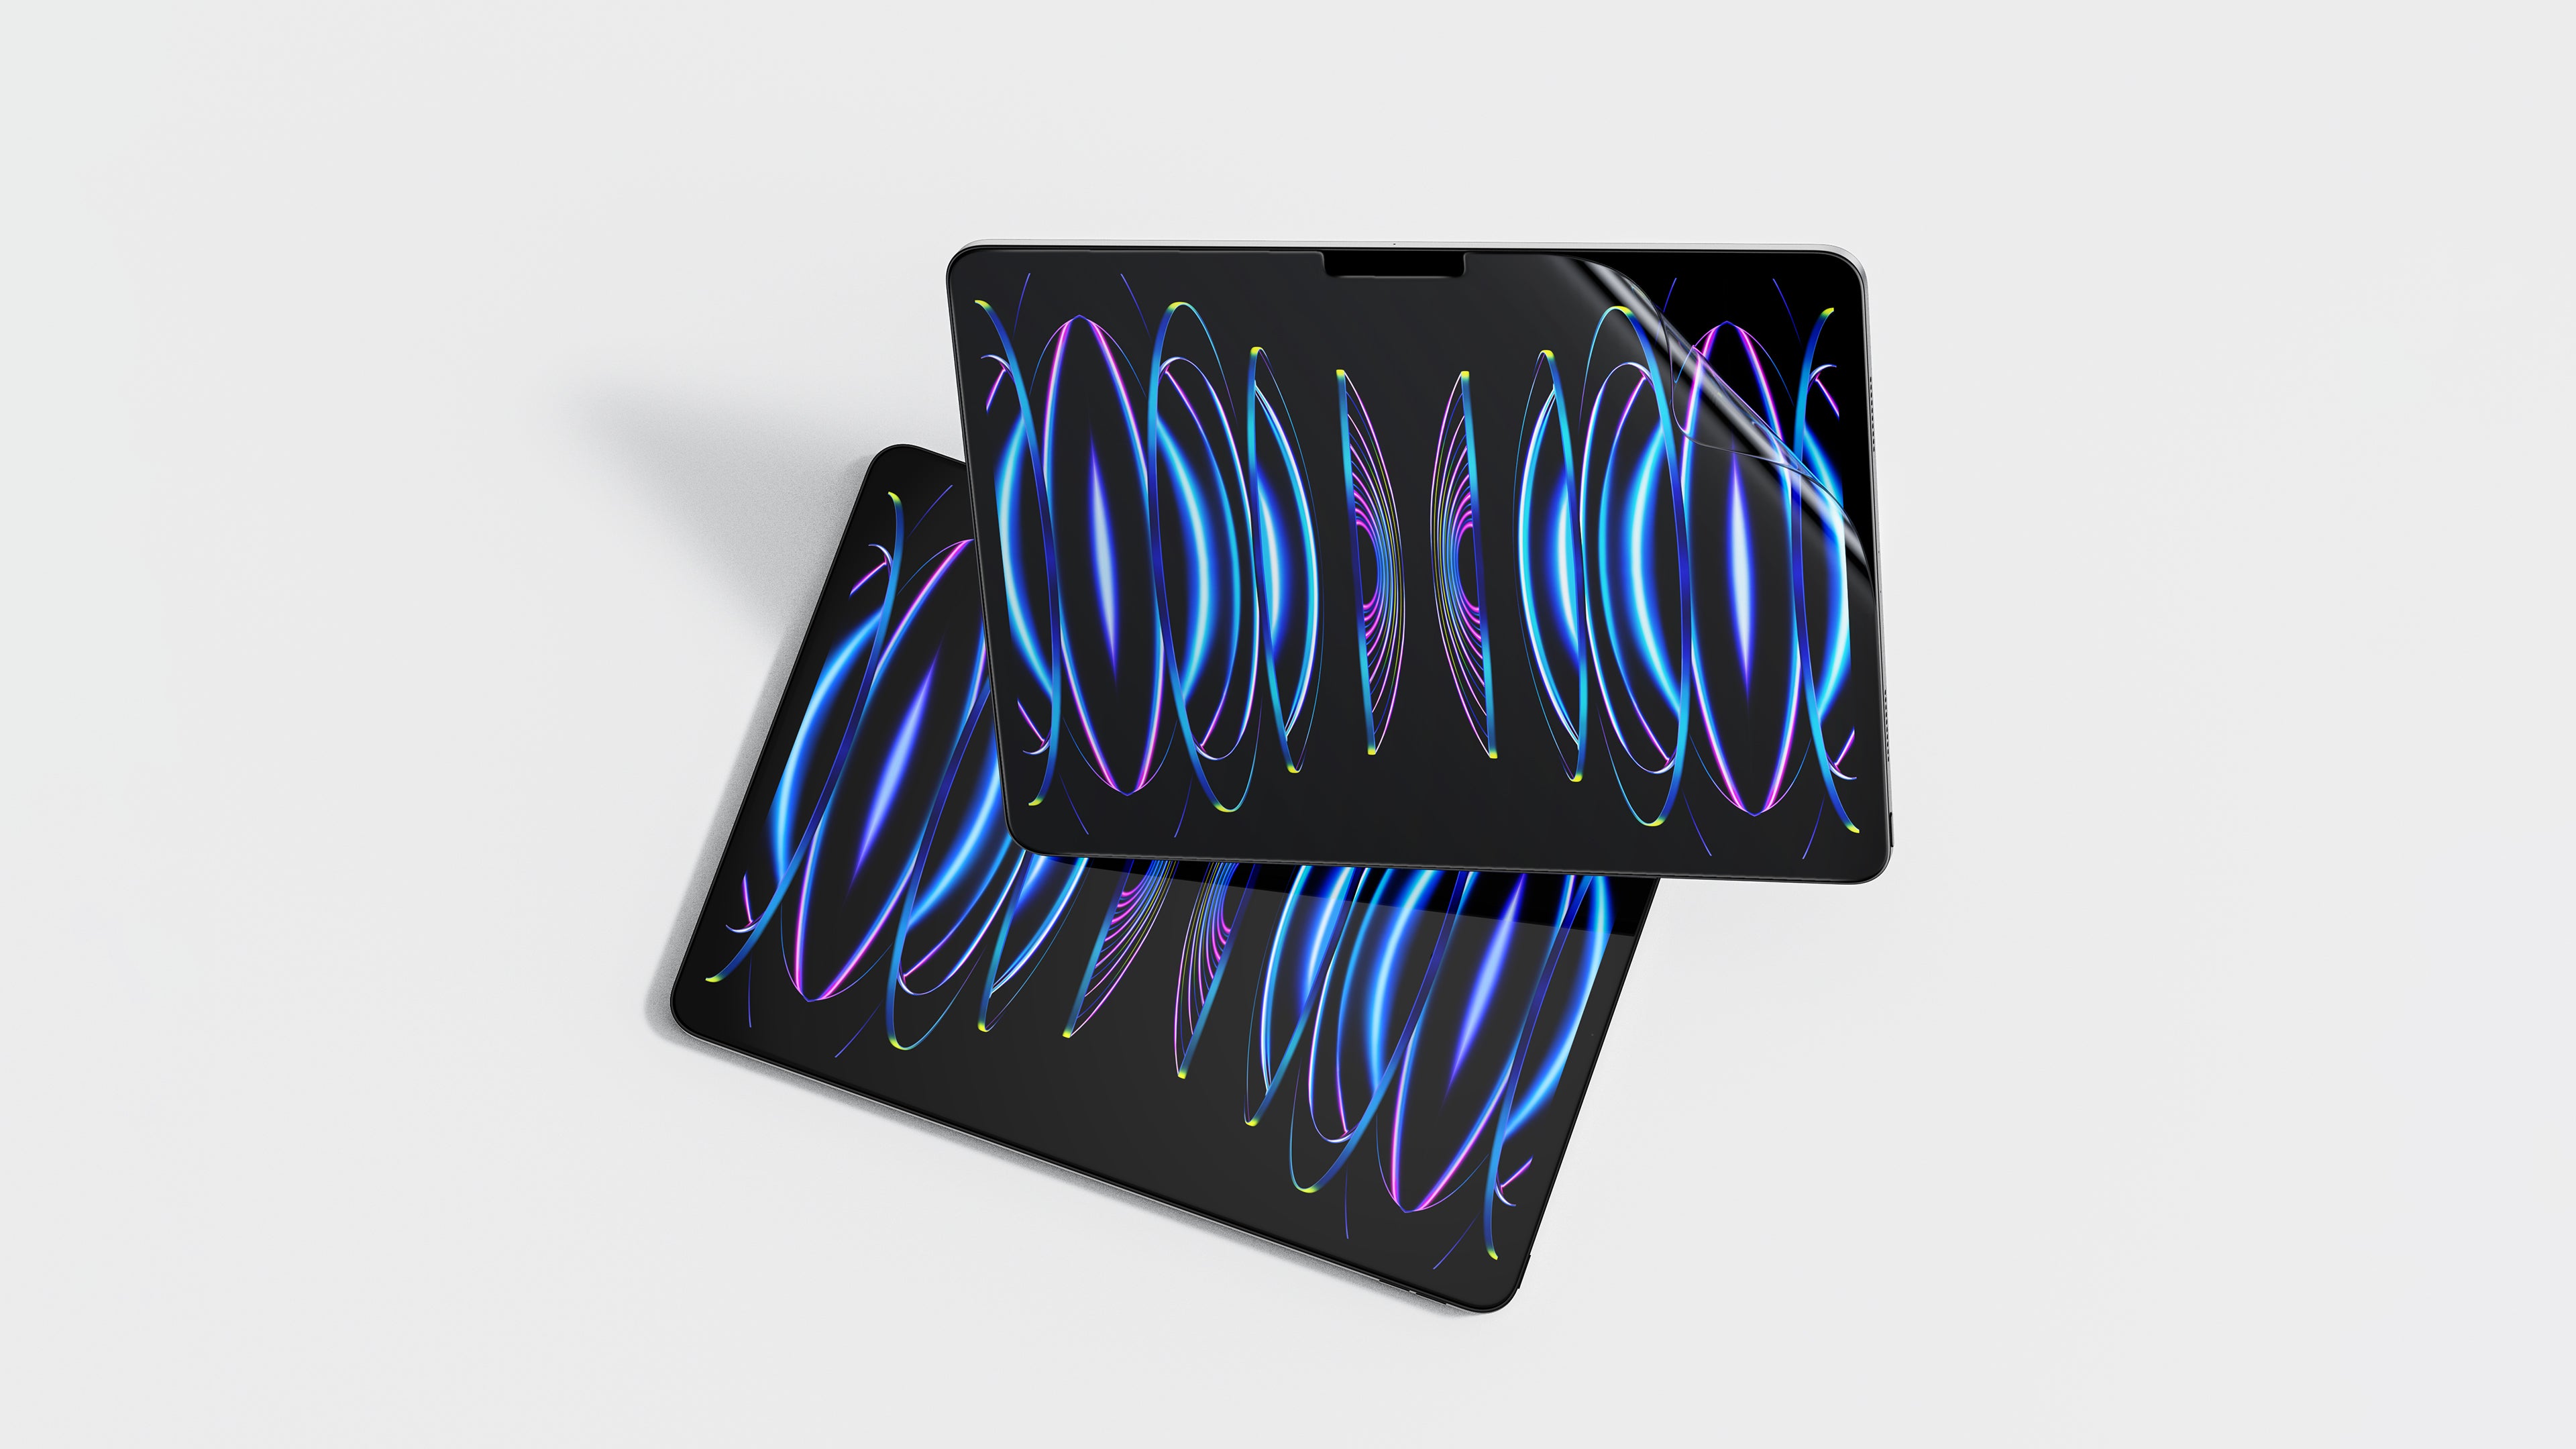 A stylish iPad case with built-in stands, showcasing both the front and back views. The case features a secure fit and multiple viewing angles, providing convenience and protection for your iPad.